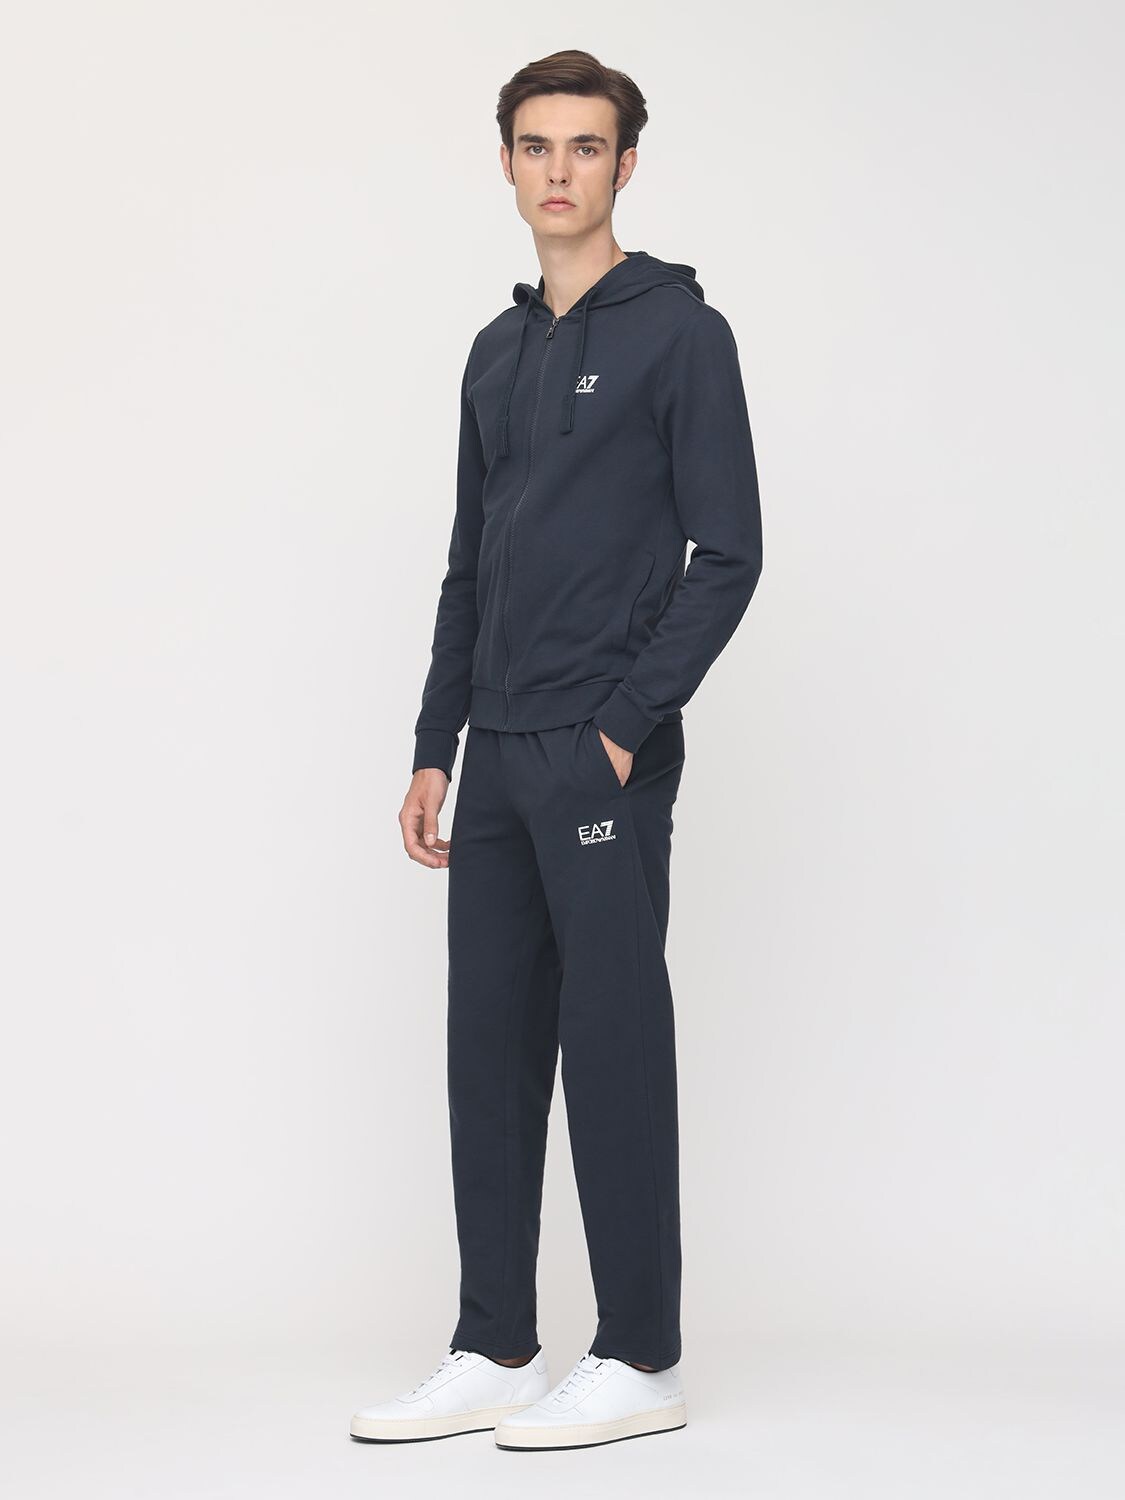 Ea7 Logo Printed Cotton Tracksuit In Midnight Blue